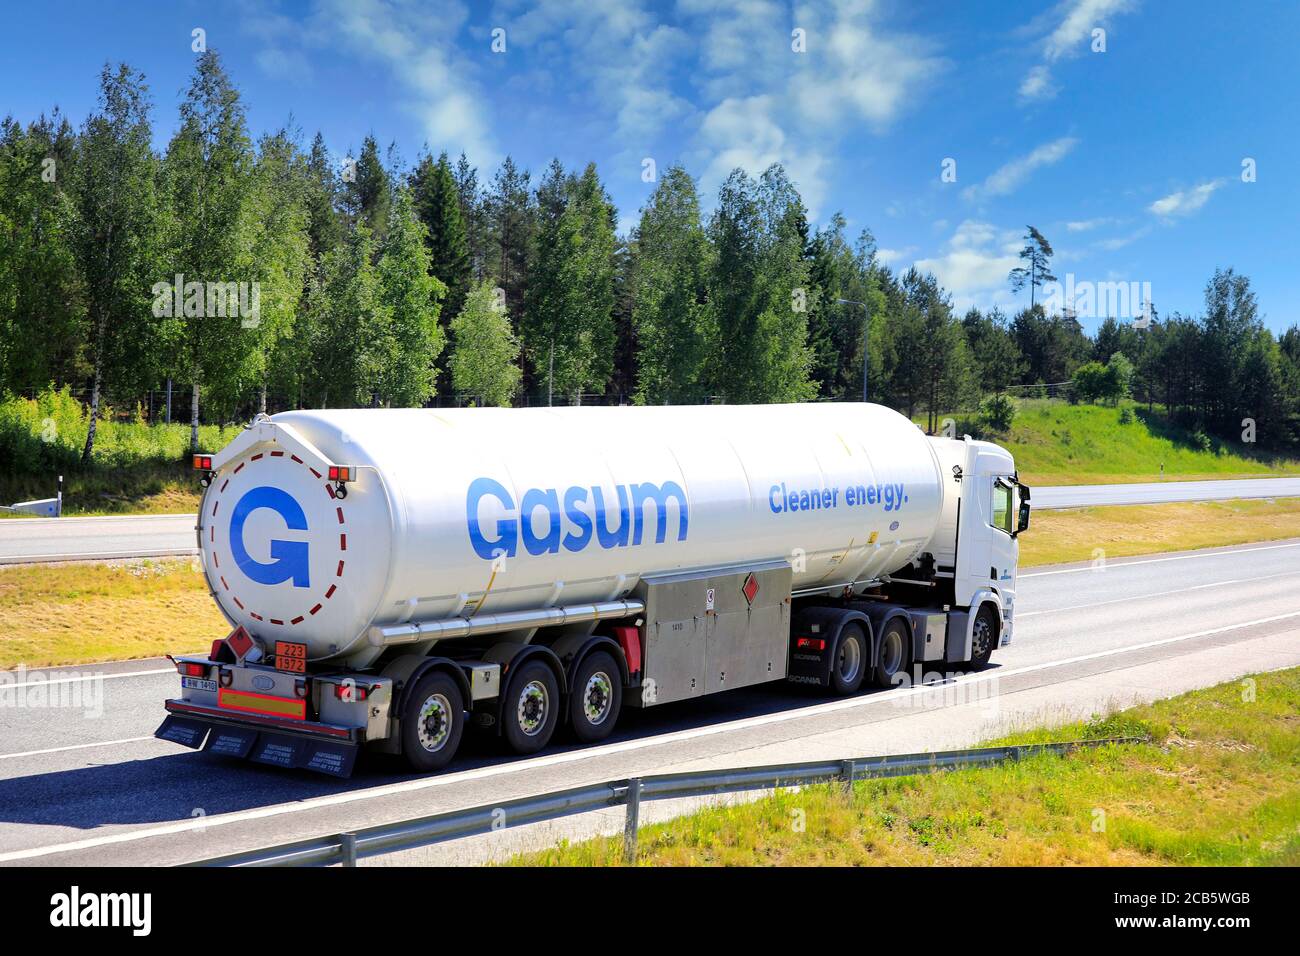 White Scania semi tank truck Gasum hauls LNG, Liquified natural gas, ADR 223-1972, on multiple lane highway in the summer. Salo, Finland. June 12, 20. Stock Photo